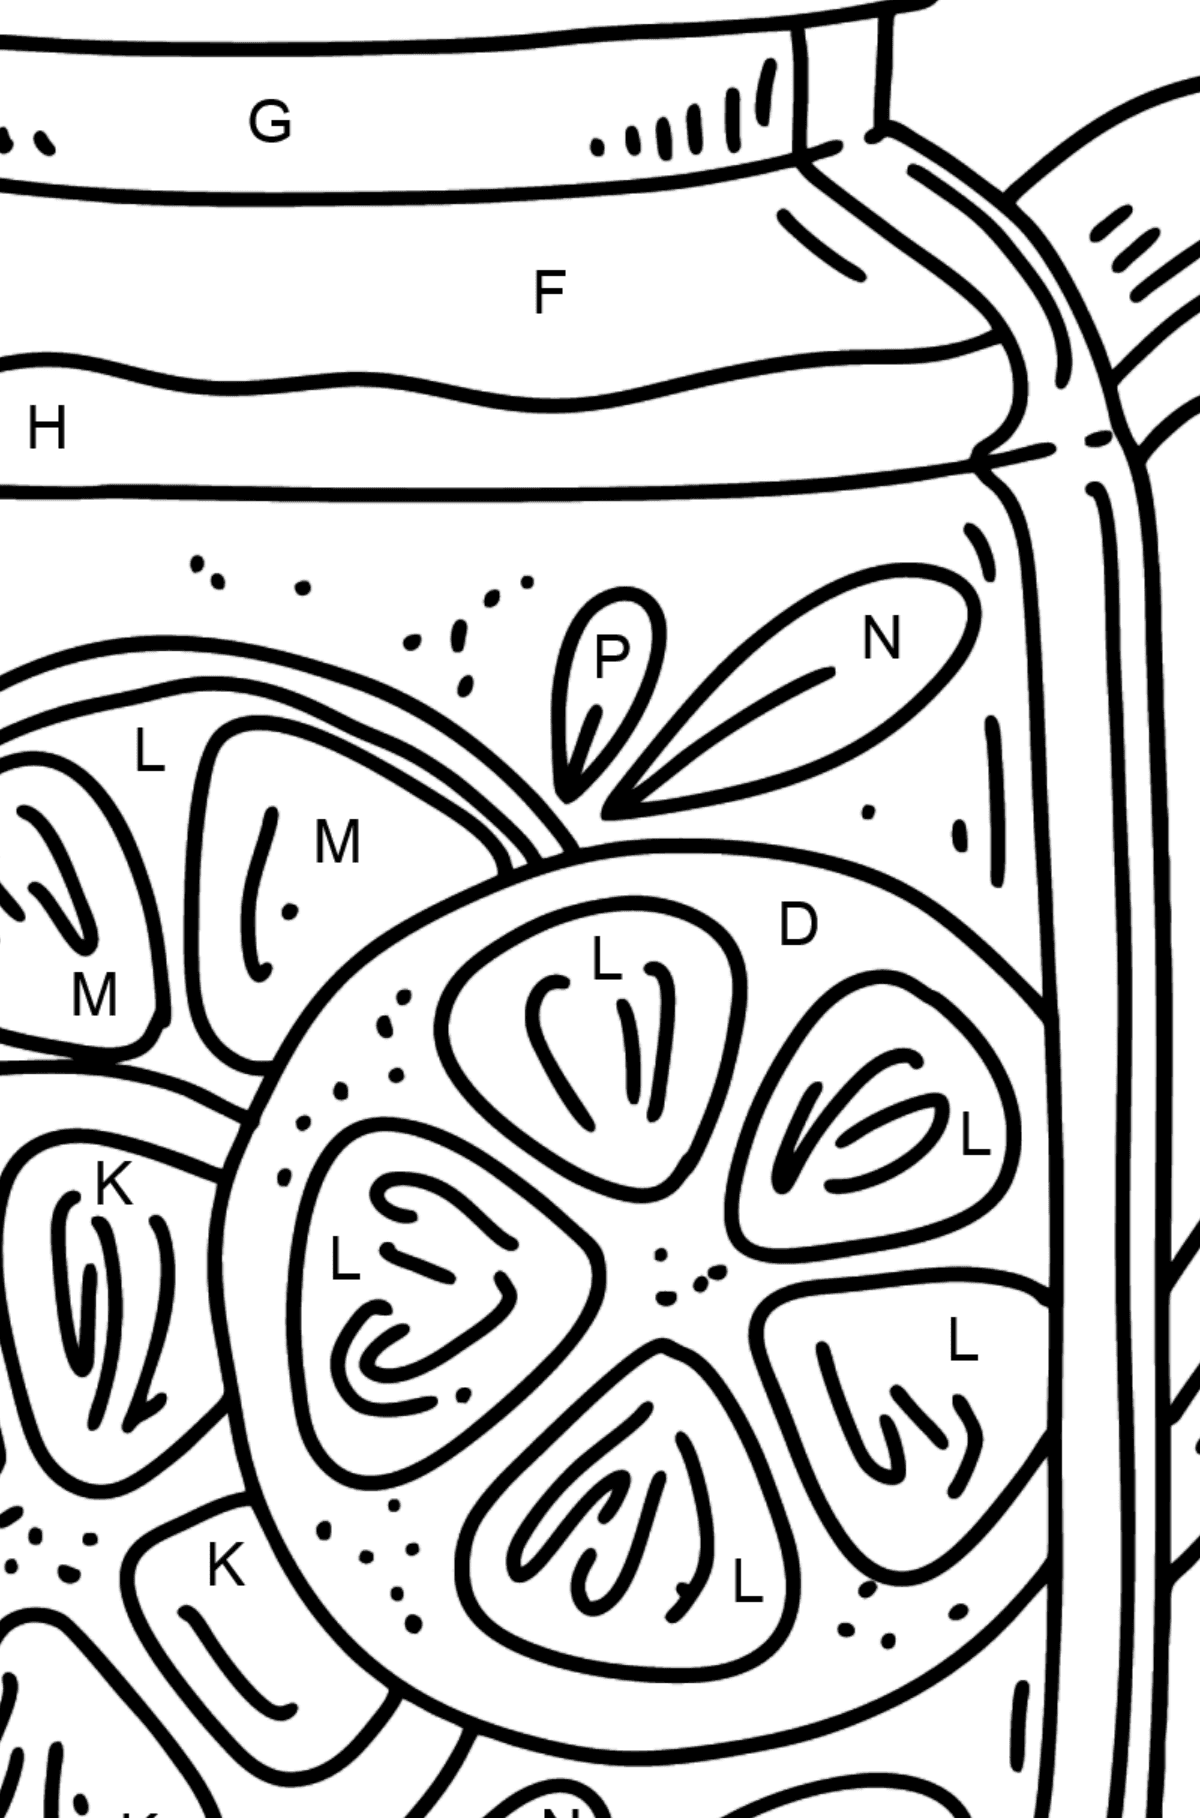 Delicious Lemonade coloring page - Coloring by Letters for Kids